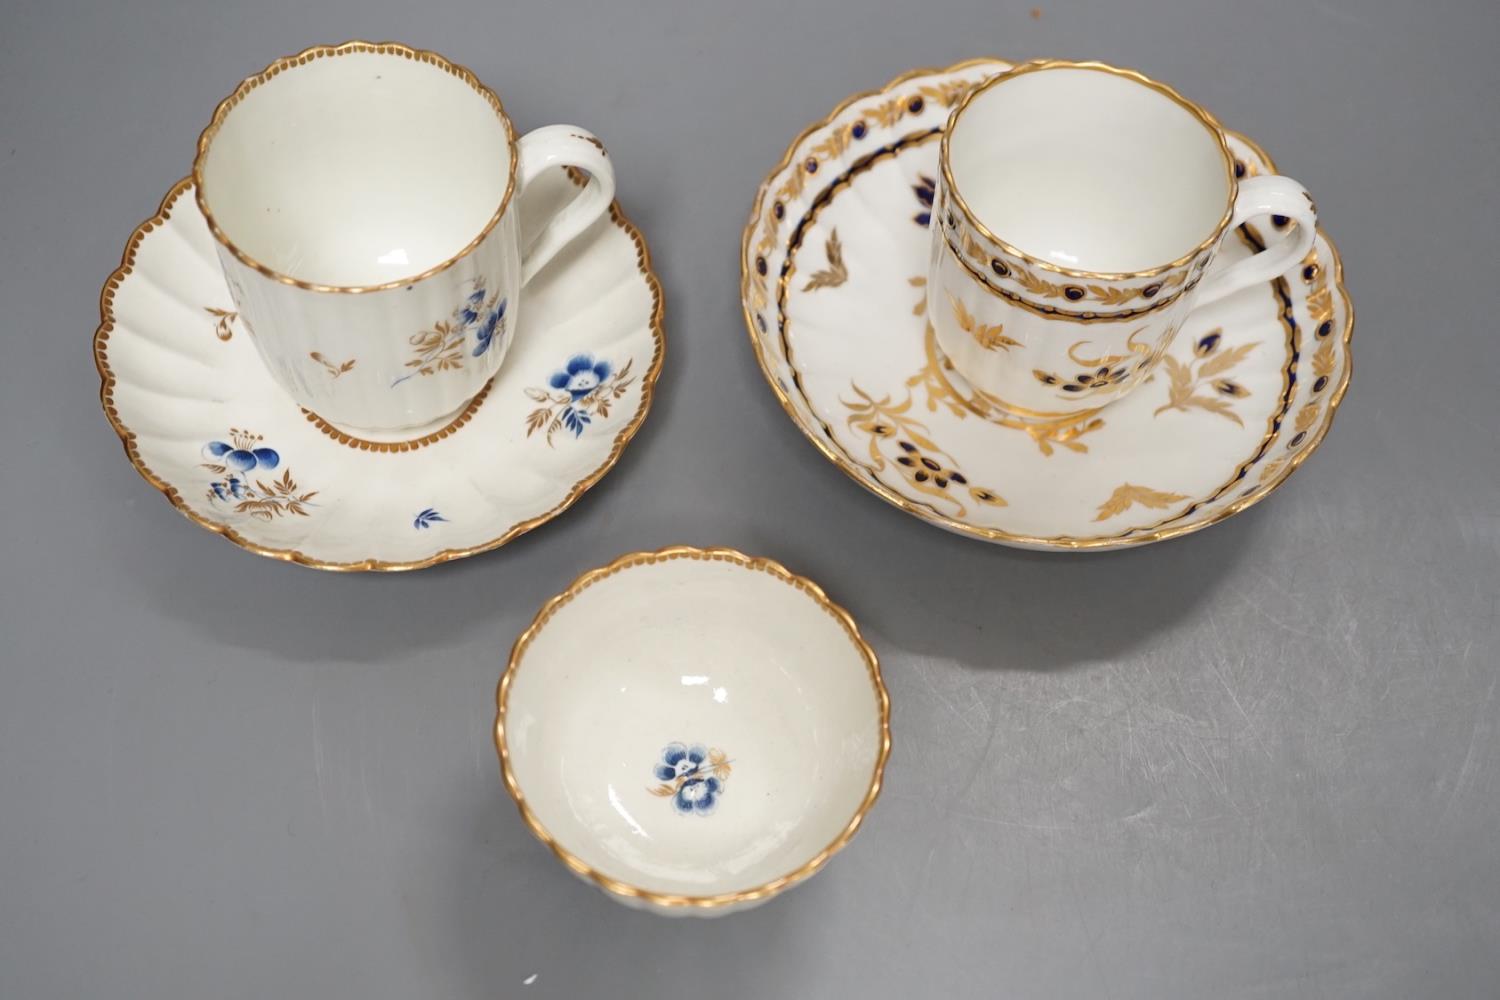 A Worcester fluted coffee cup, teacup and saucer painted with dry blue flowers and gilt foliage - Image 2 of 4